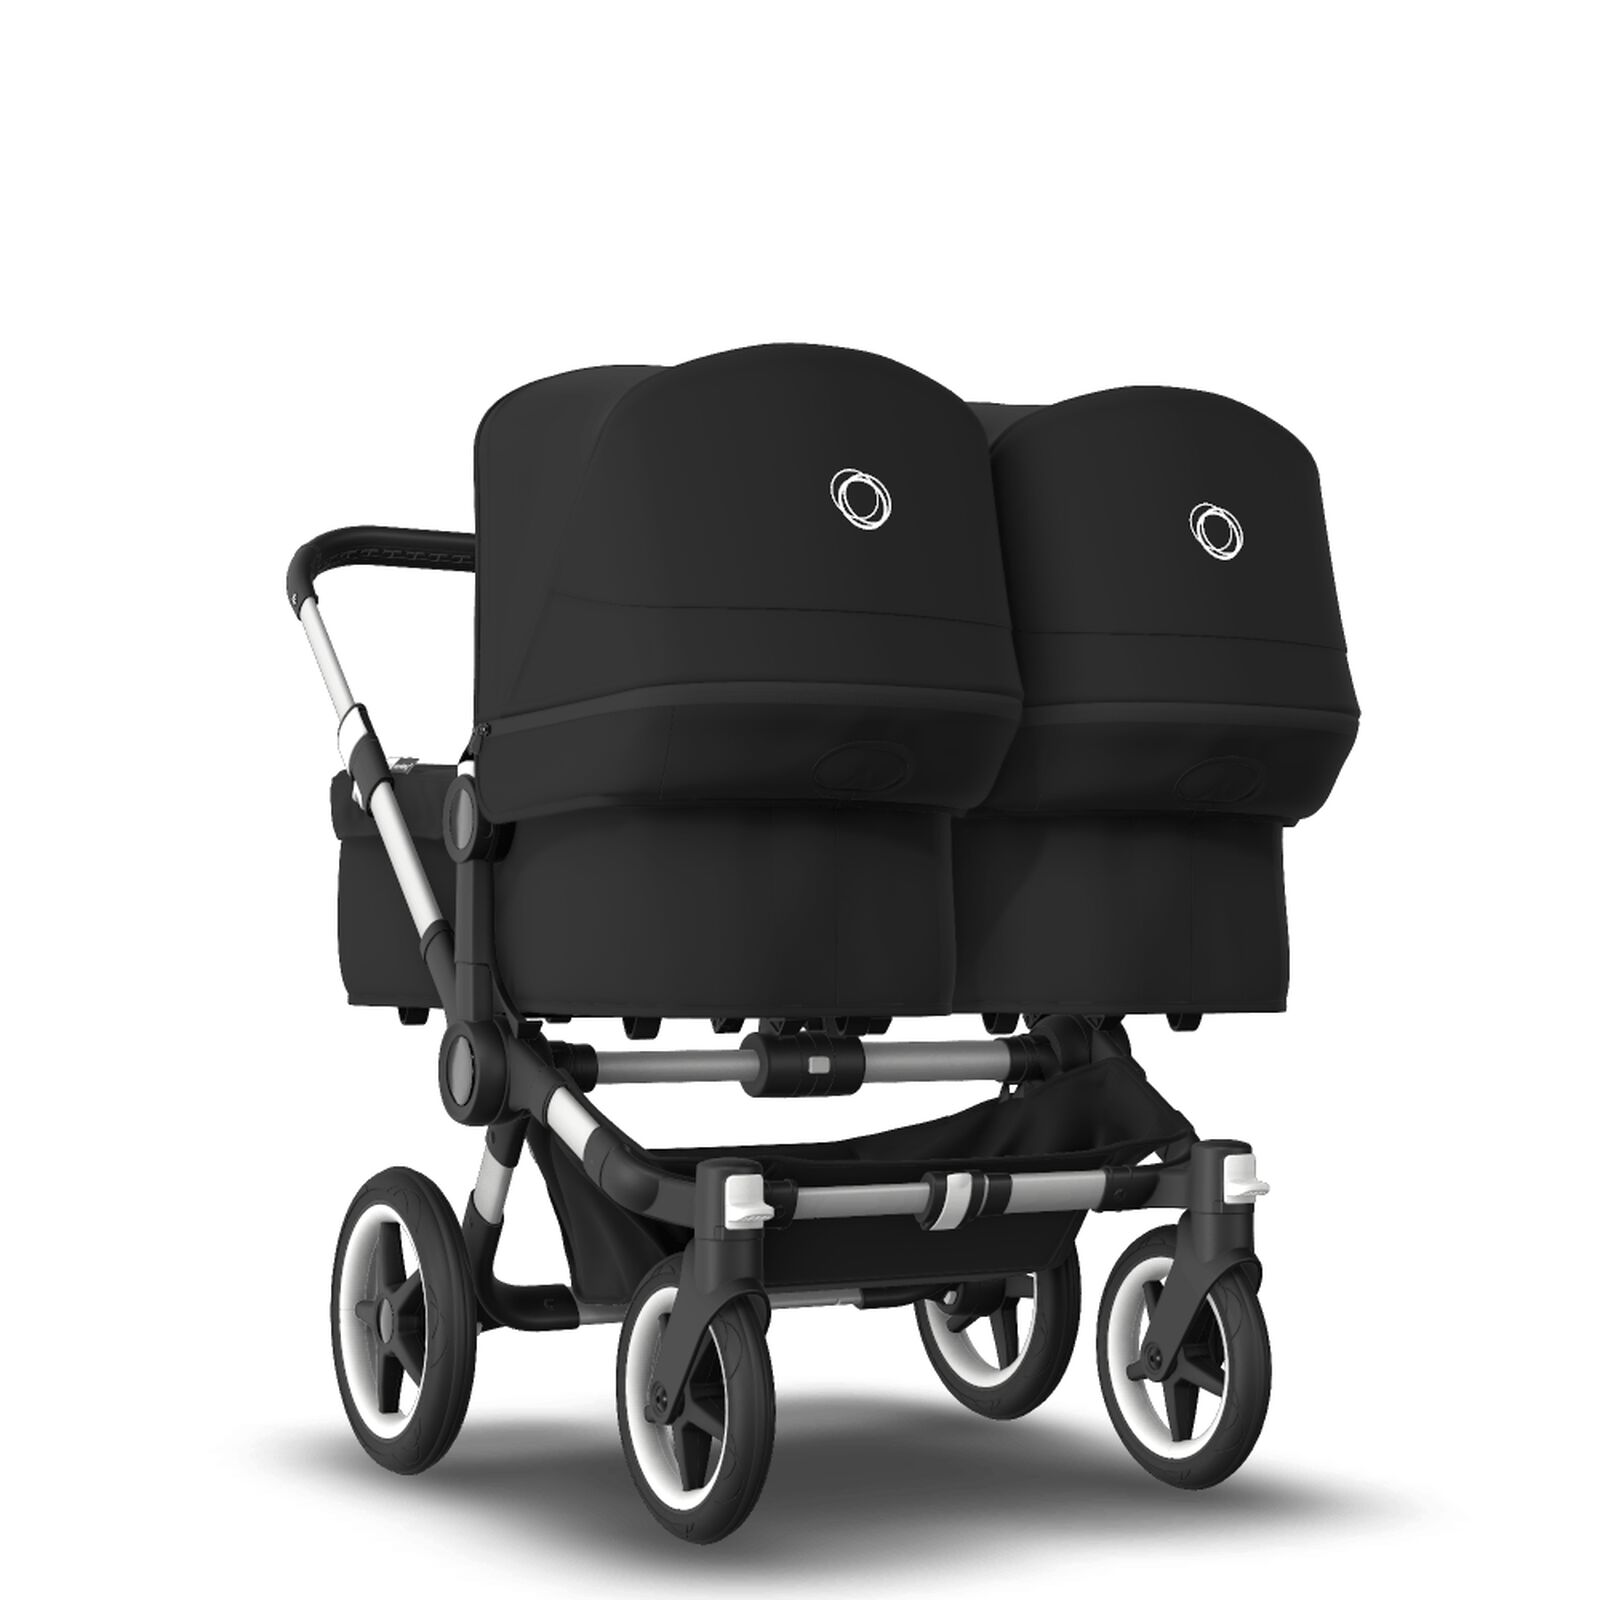 Bugaboo Donkey 3 Twin travel system - View 8